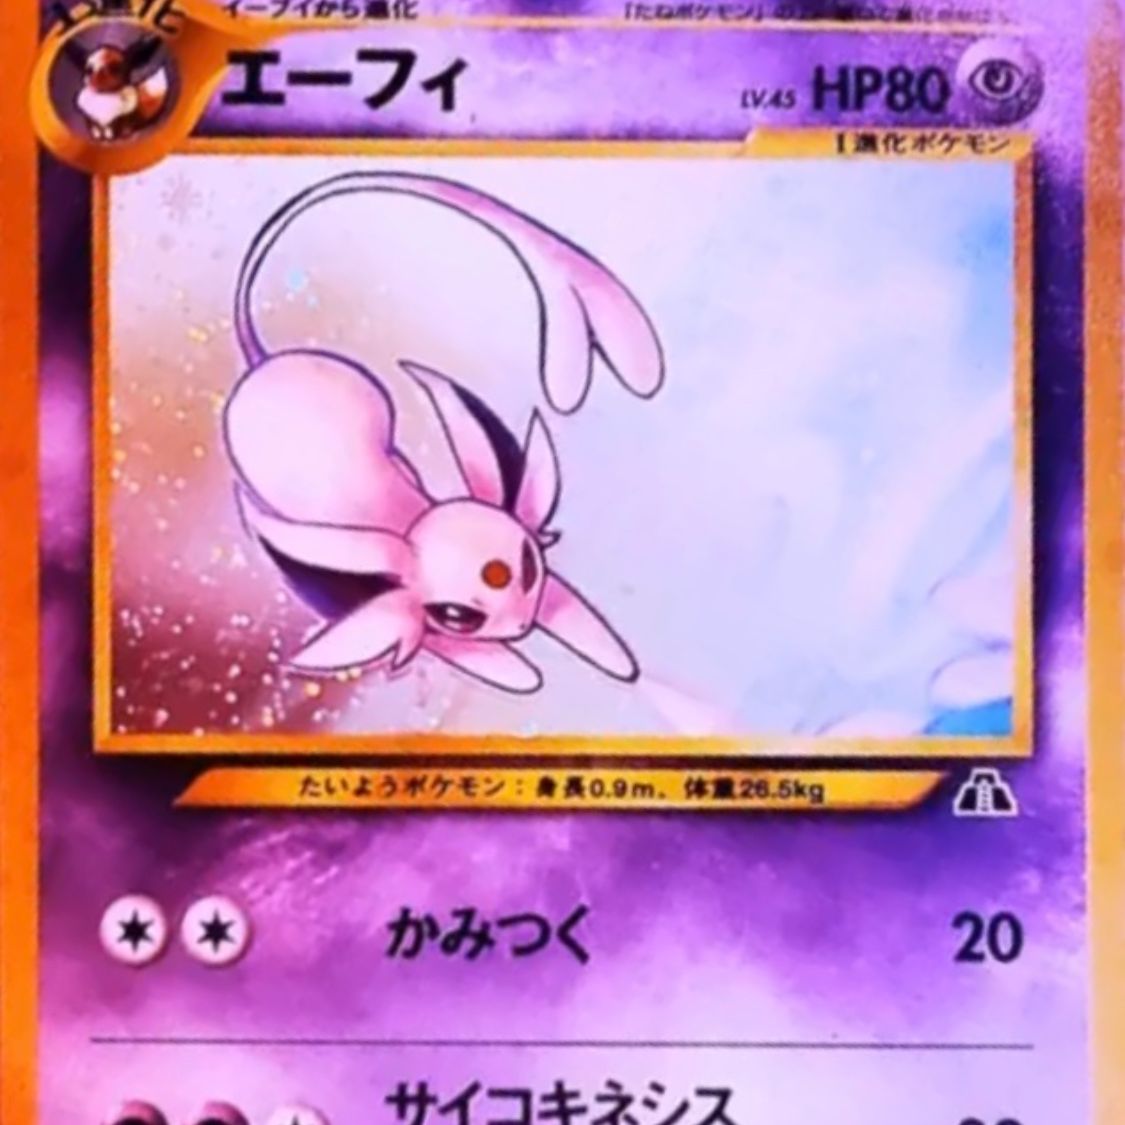 The cover for それは皆からの秘密です (185.45.195.172) by Sienna Sleep, a picture of a Japanese Pokemon card of Espeon.